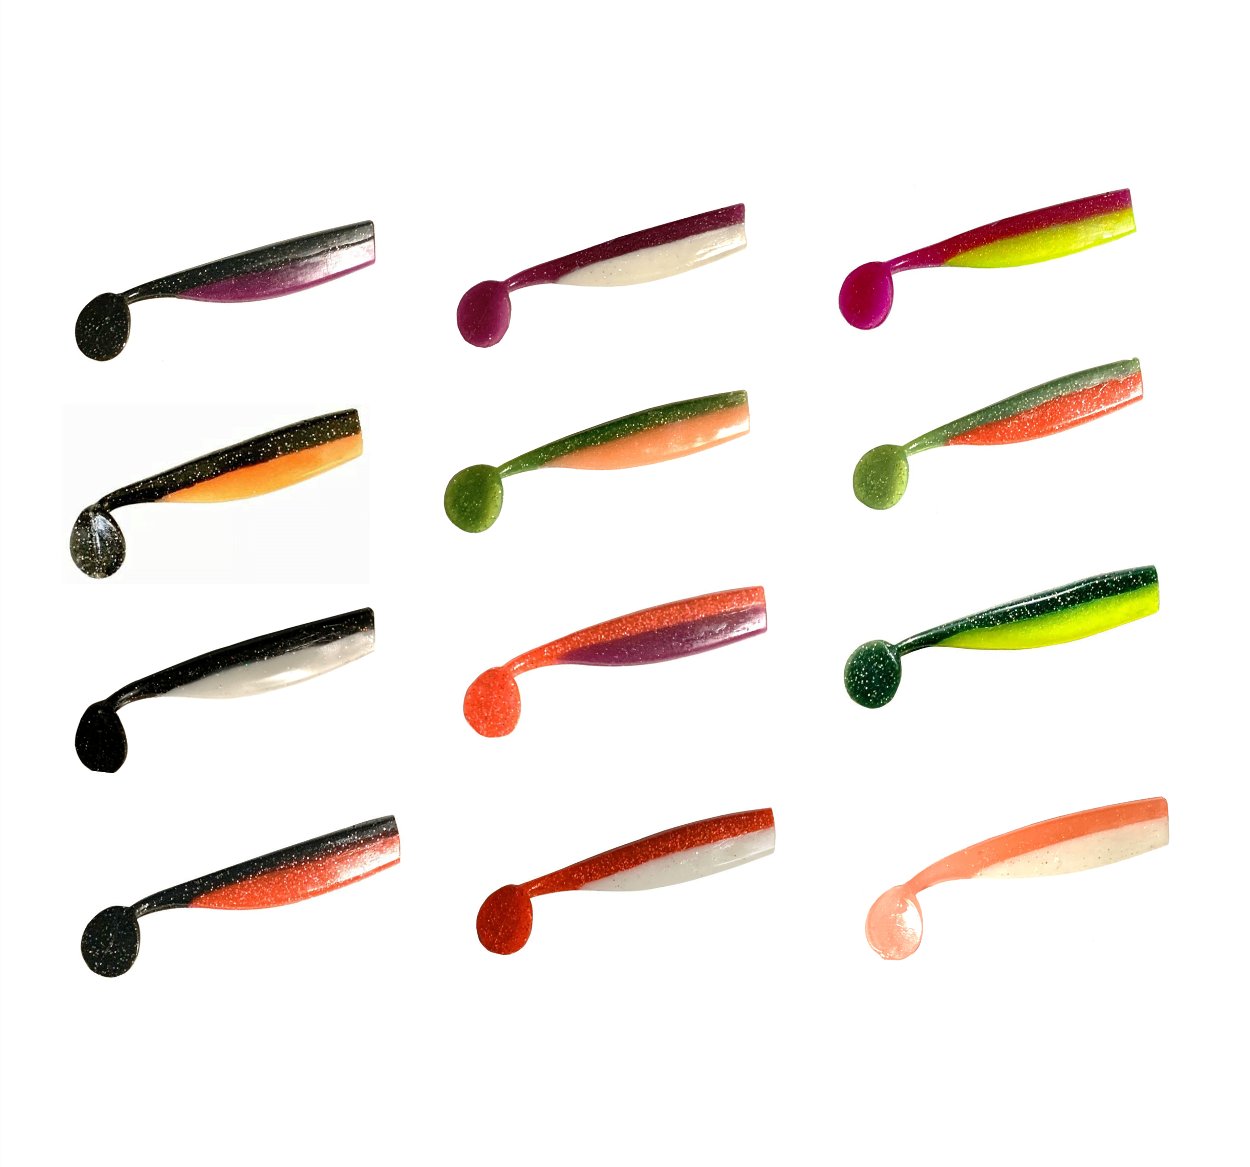 https://horkerbaits.com/wp-content/uploads/2023/02/Boss-Hog-Two-color-swimbaits.png